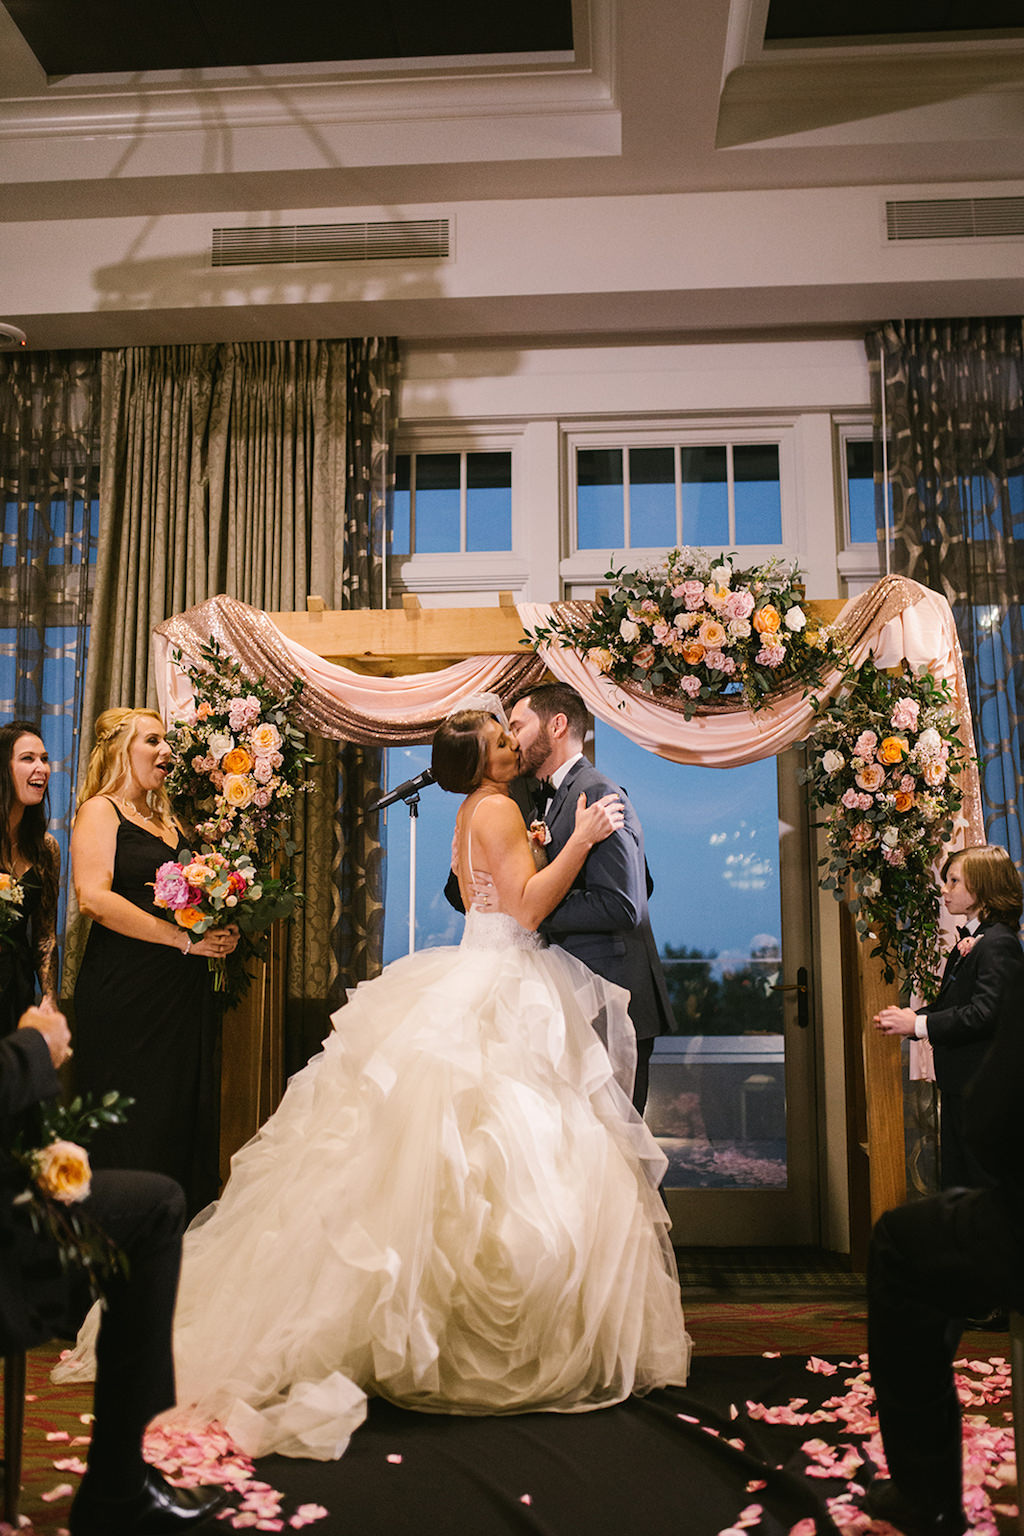 Tampa Bay Bride and Groom First Kiss Under Wooden Arch with Blush Pink and Sparkle Draping and Colorful Flower Bouquets Indoor Ballroom Wedding Ceremony Portrait | Downtown St. Pete Hotel Wedding Venue The Birchwood